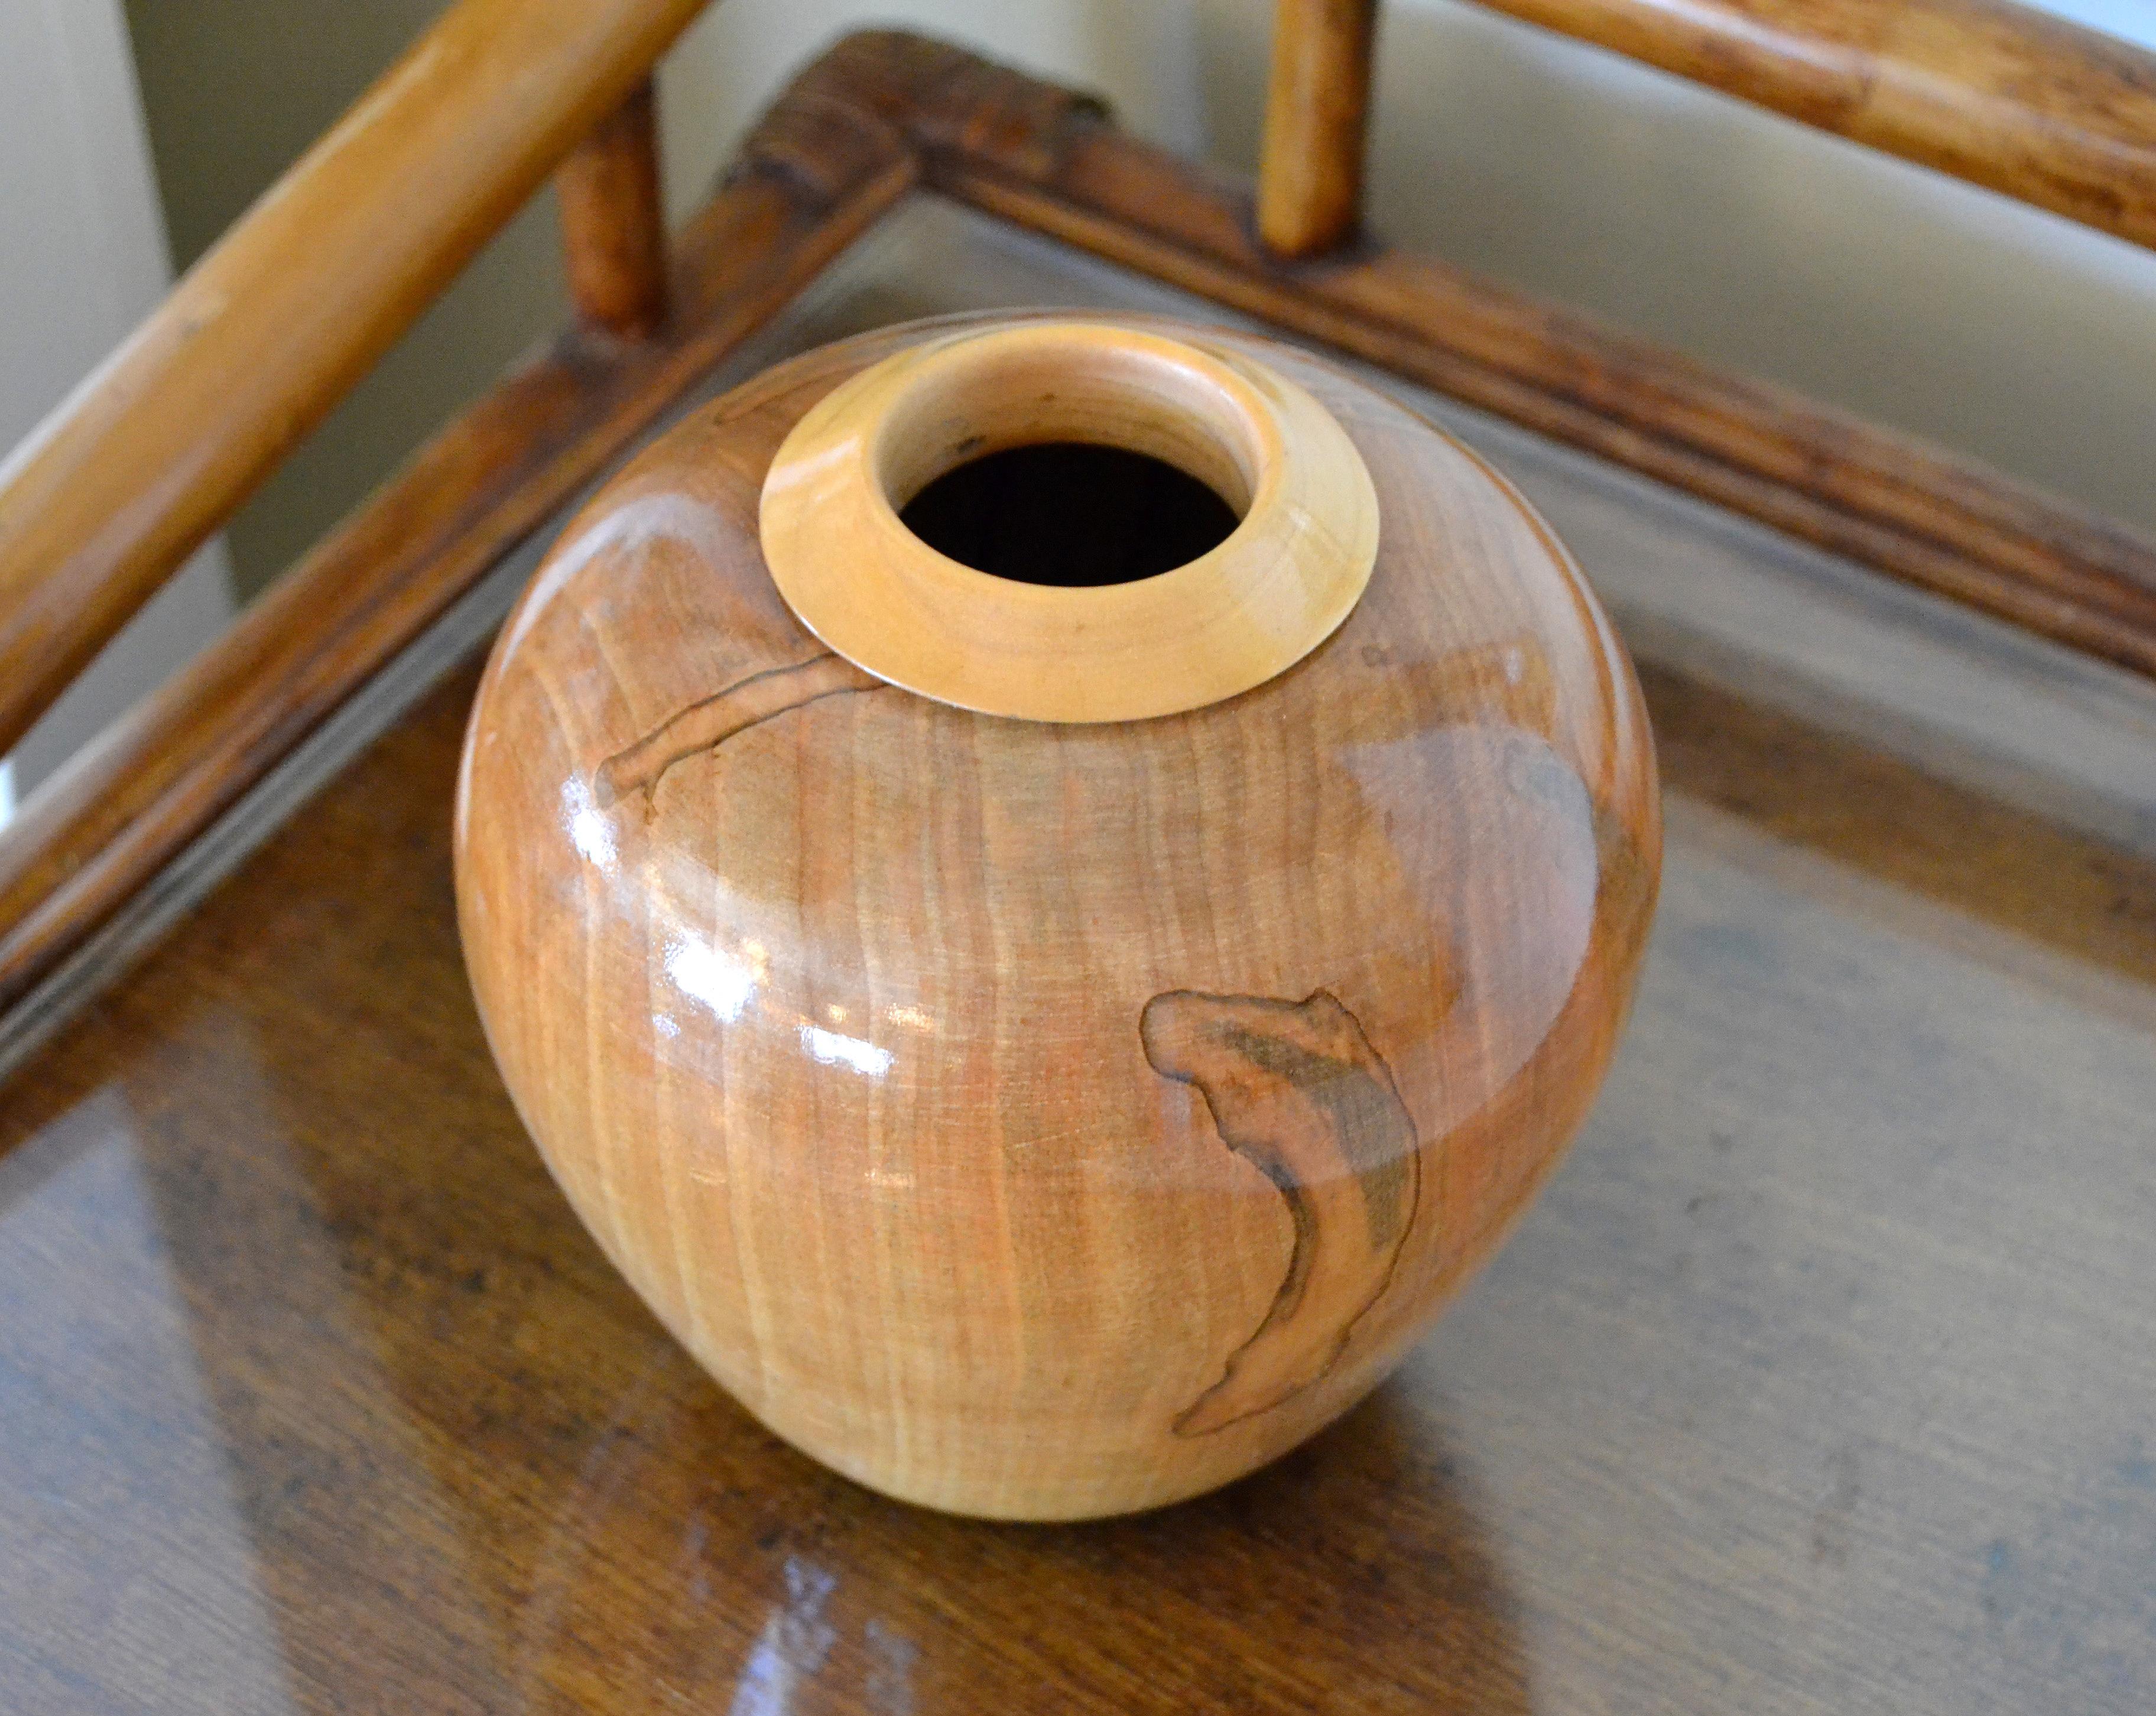 American Decorative Folk Art Handcrafted Exotic Wood Lacquered Belly Flower Vase For Sale